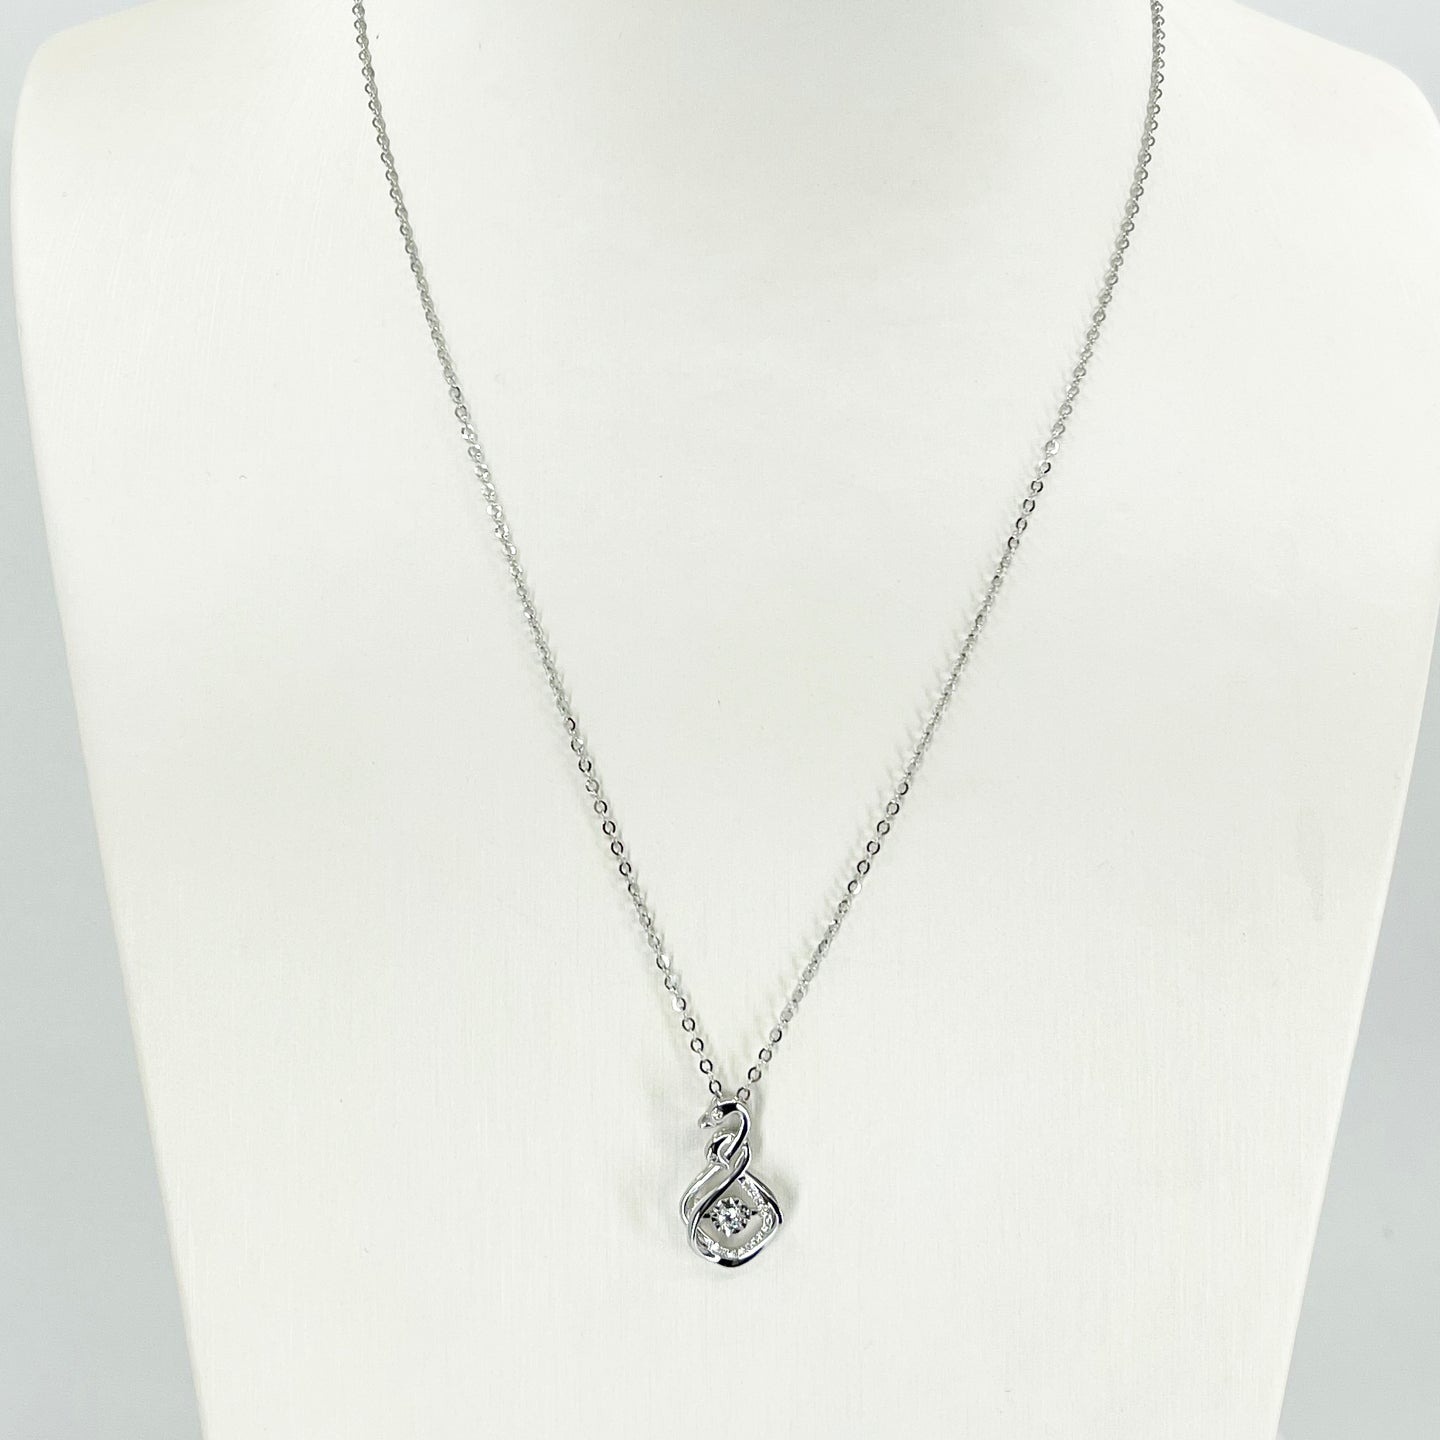 18K Solid White Gold Round Link Chain Necklace with Diamond Swan Pendant 16